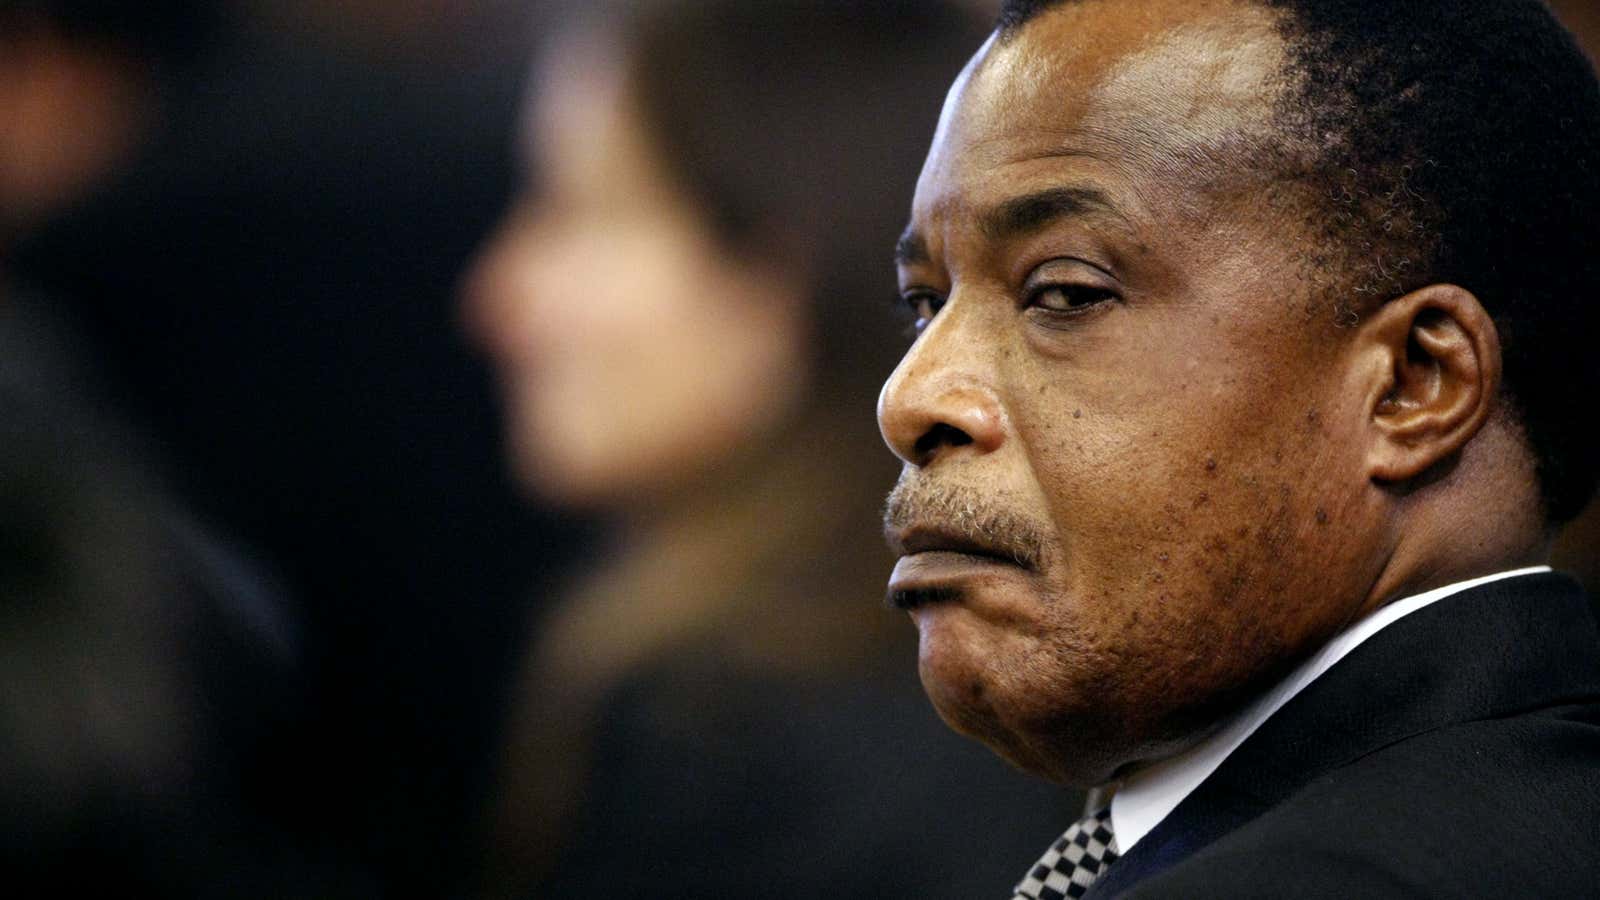 It’s all allegedly happening under president Denis Sassou-Nguesso’s watch.